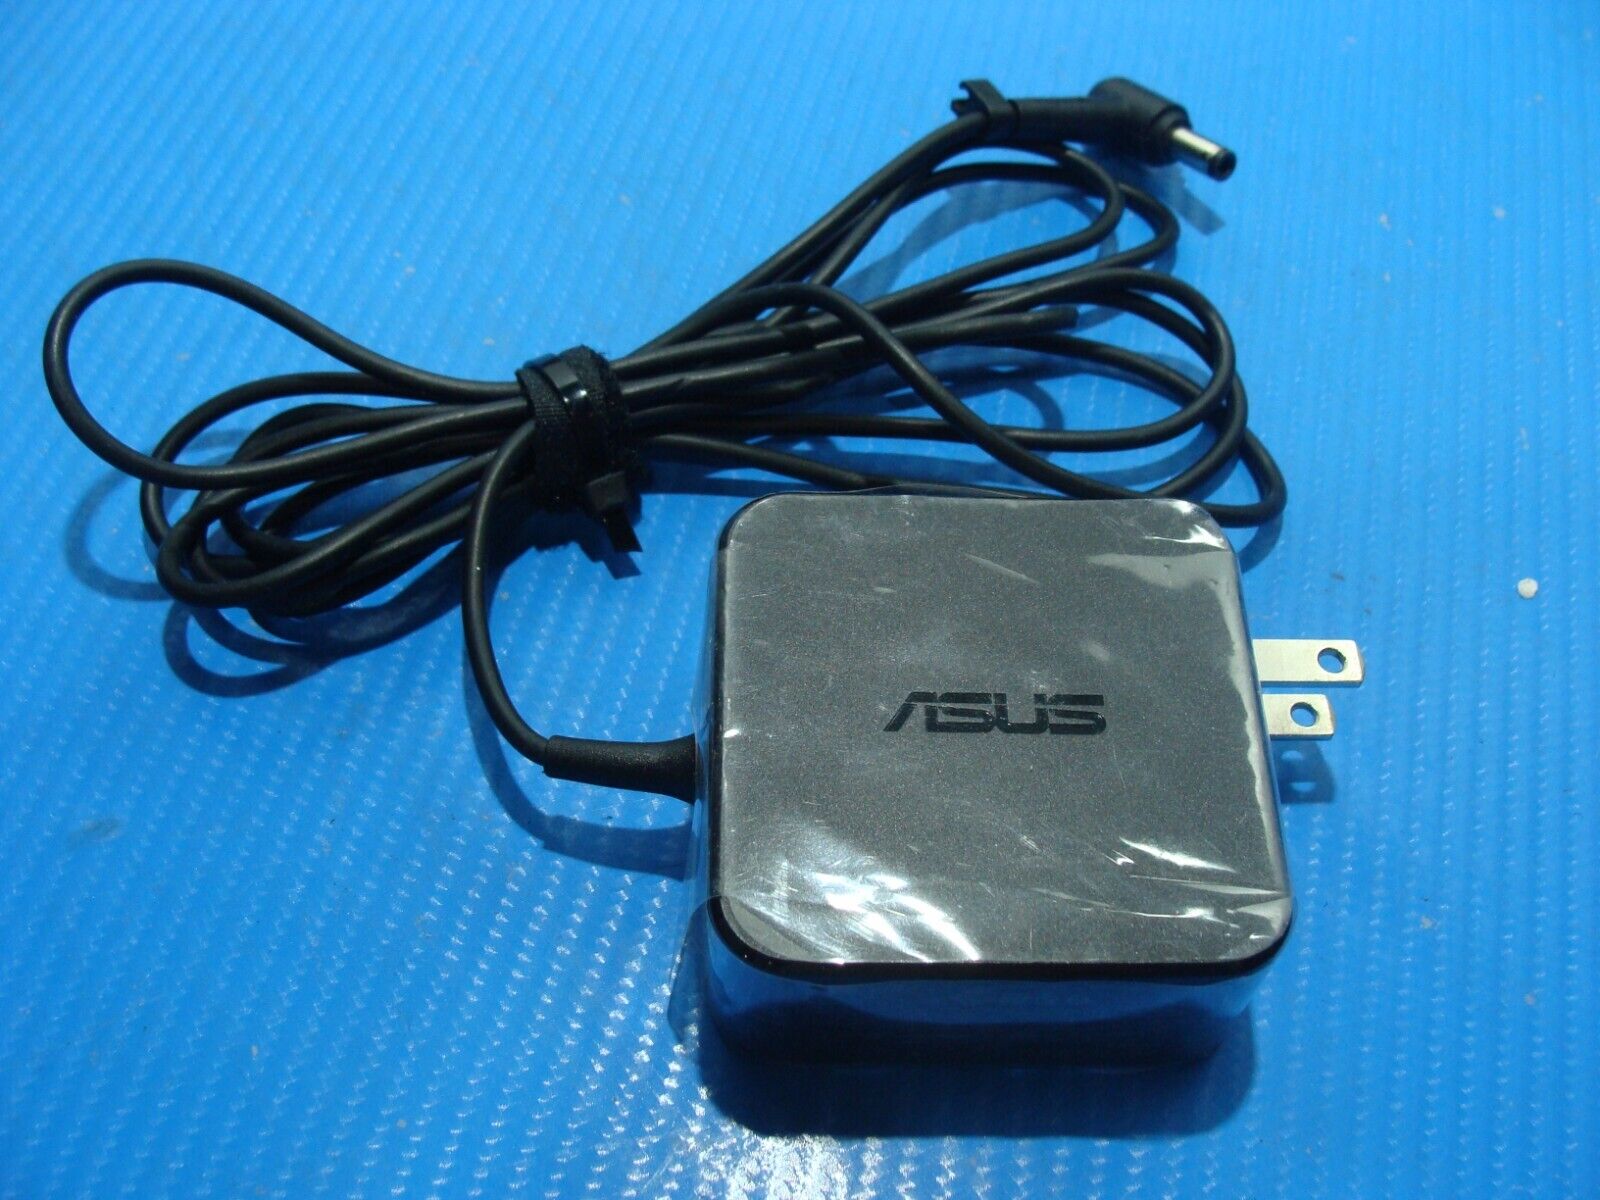 NEW Genuine 45W Asus Laptop Charger Adapter 5.5 mm x 2.5mm ADP-45BW B, AD883J20